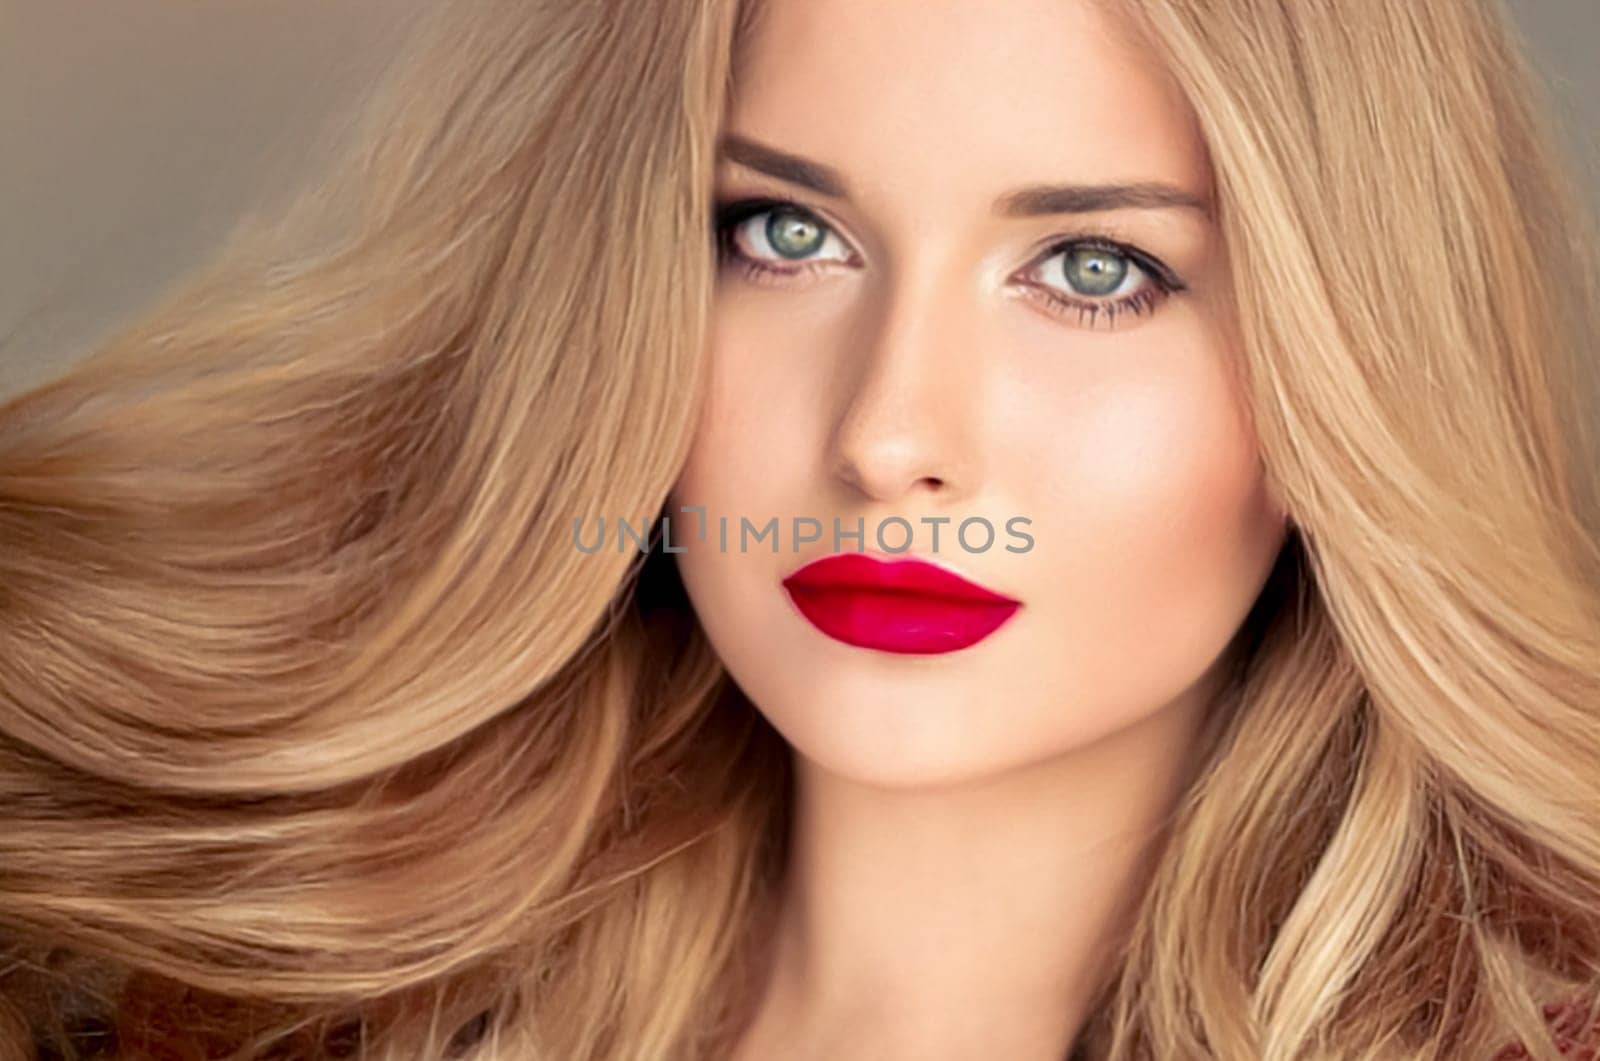 Beauty, makeup and hairstyle, face portrait of beautiful woman, red lipstick make-up and hair styling for skincare cosmetics, hair care, glamour style and fashion look by Anneleven